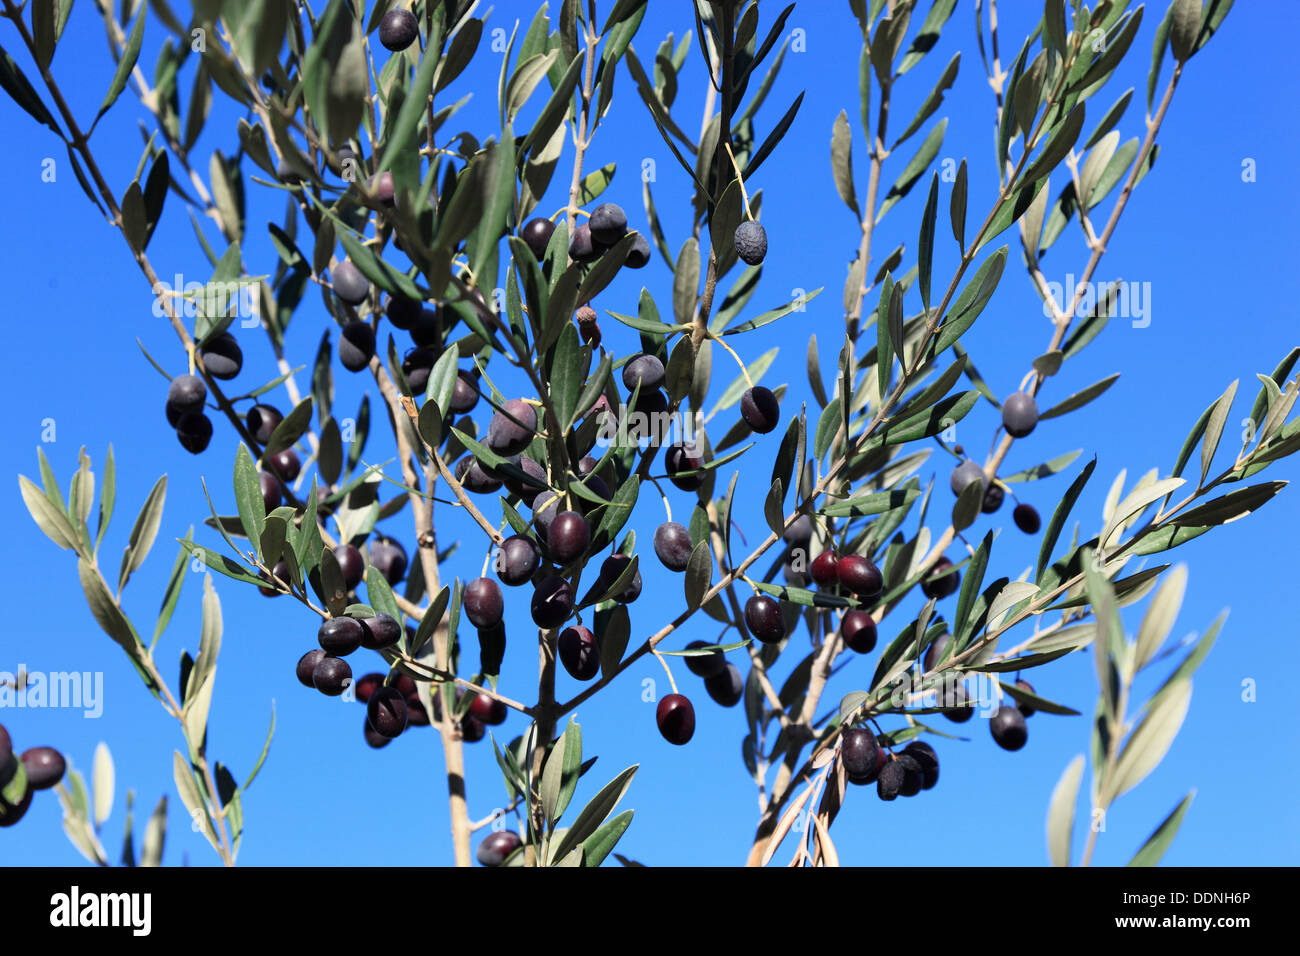 Olive branches with olives, stone fruit, ripe fruits Stock Photo